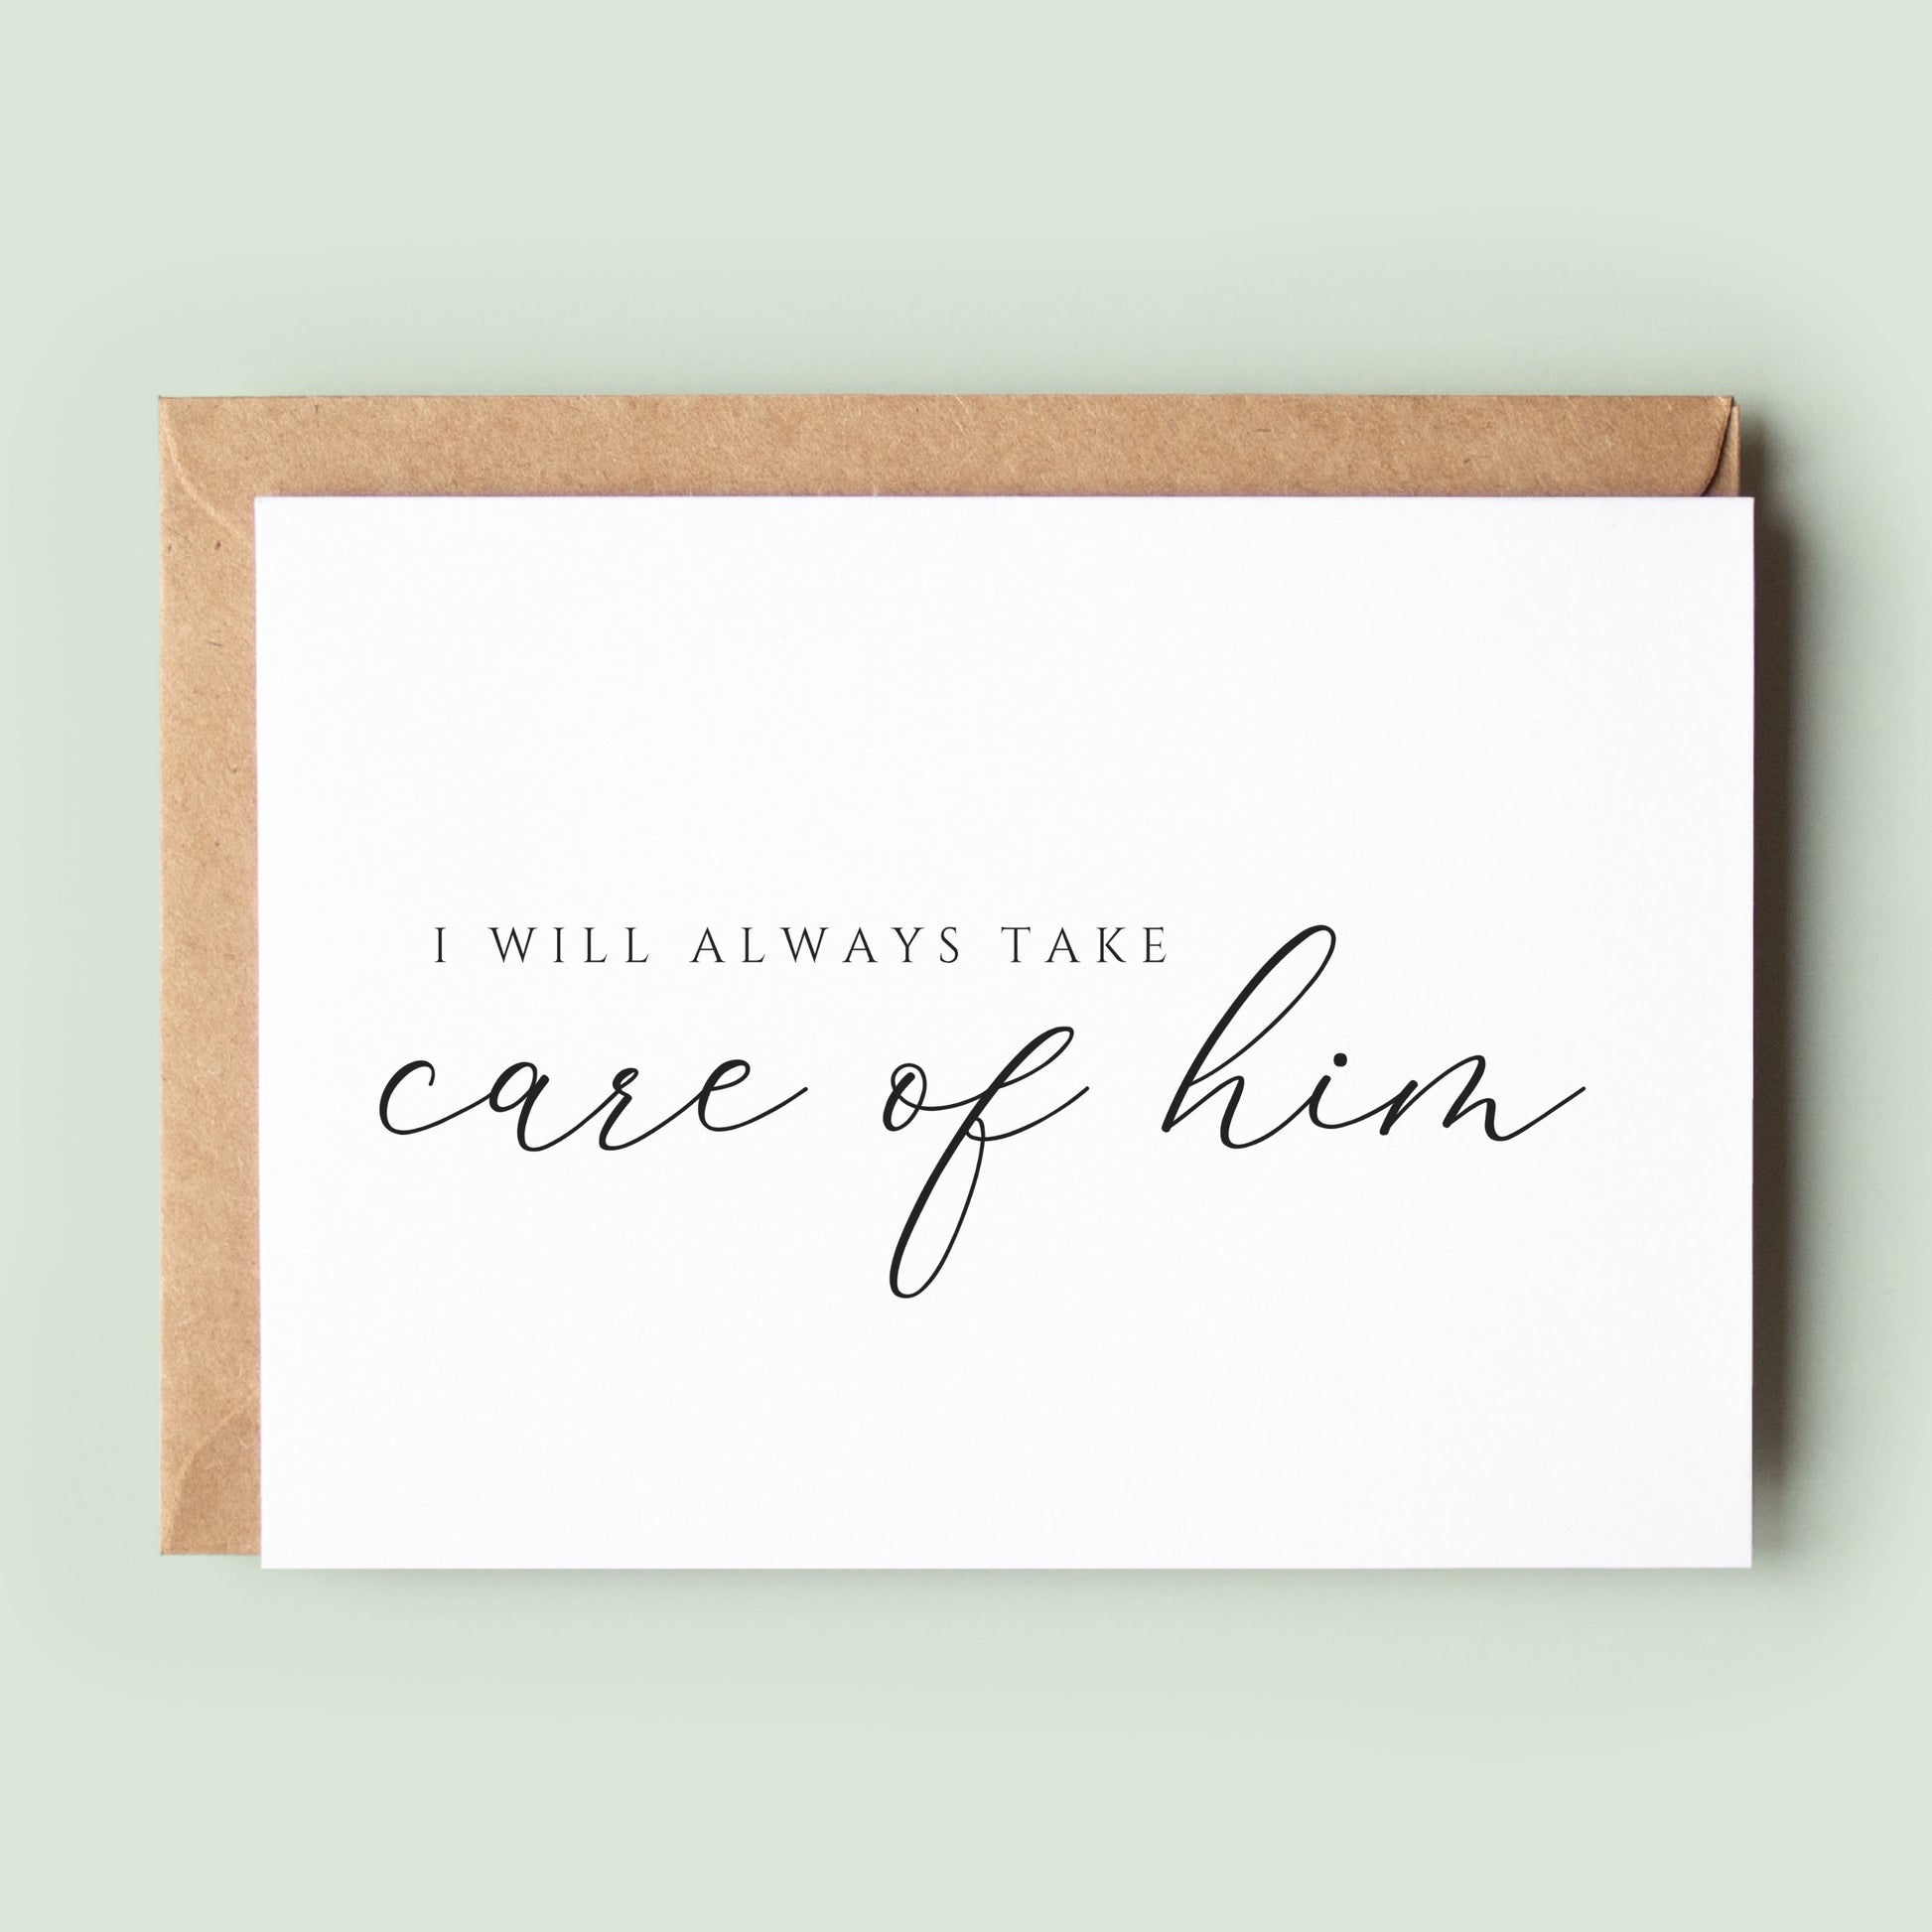 I Will Always Take Care of Him Wedding Day Card To Parents in Law, Mother In Law Gift, Father of the Bride Gift, Mother in Law Card